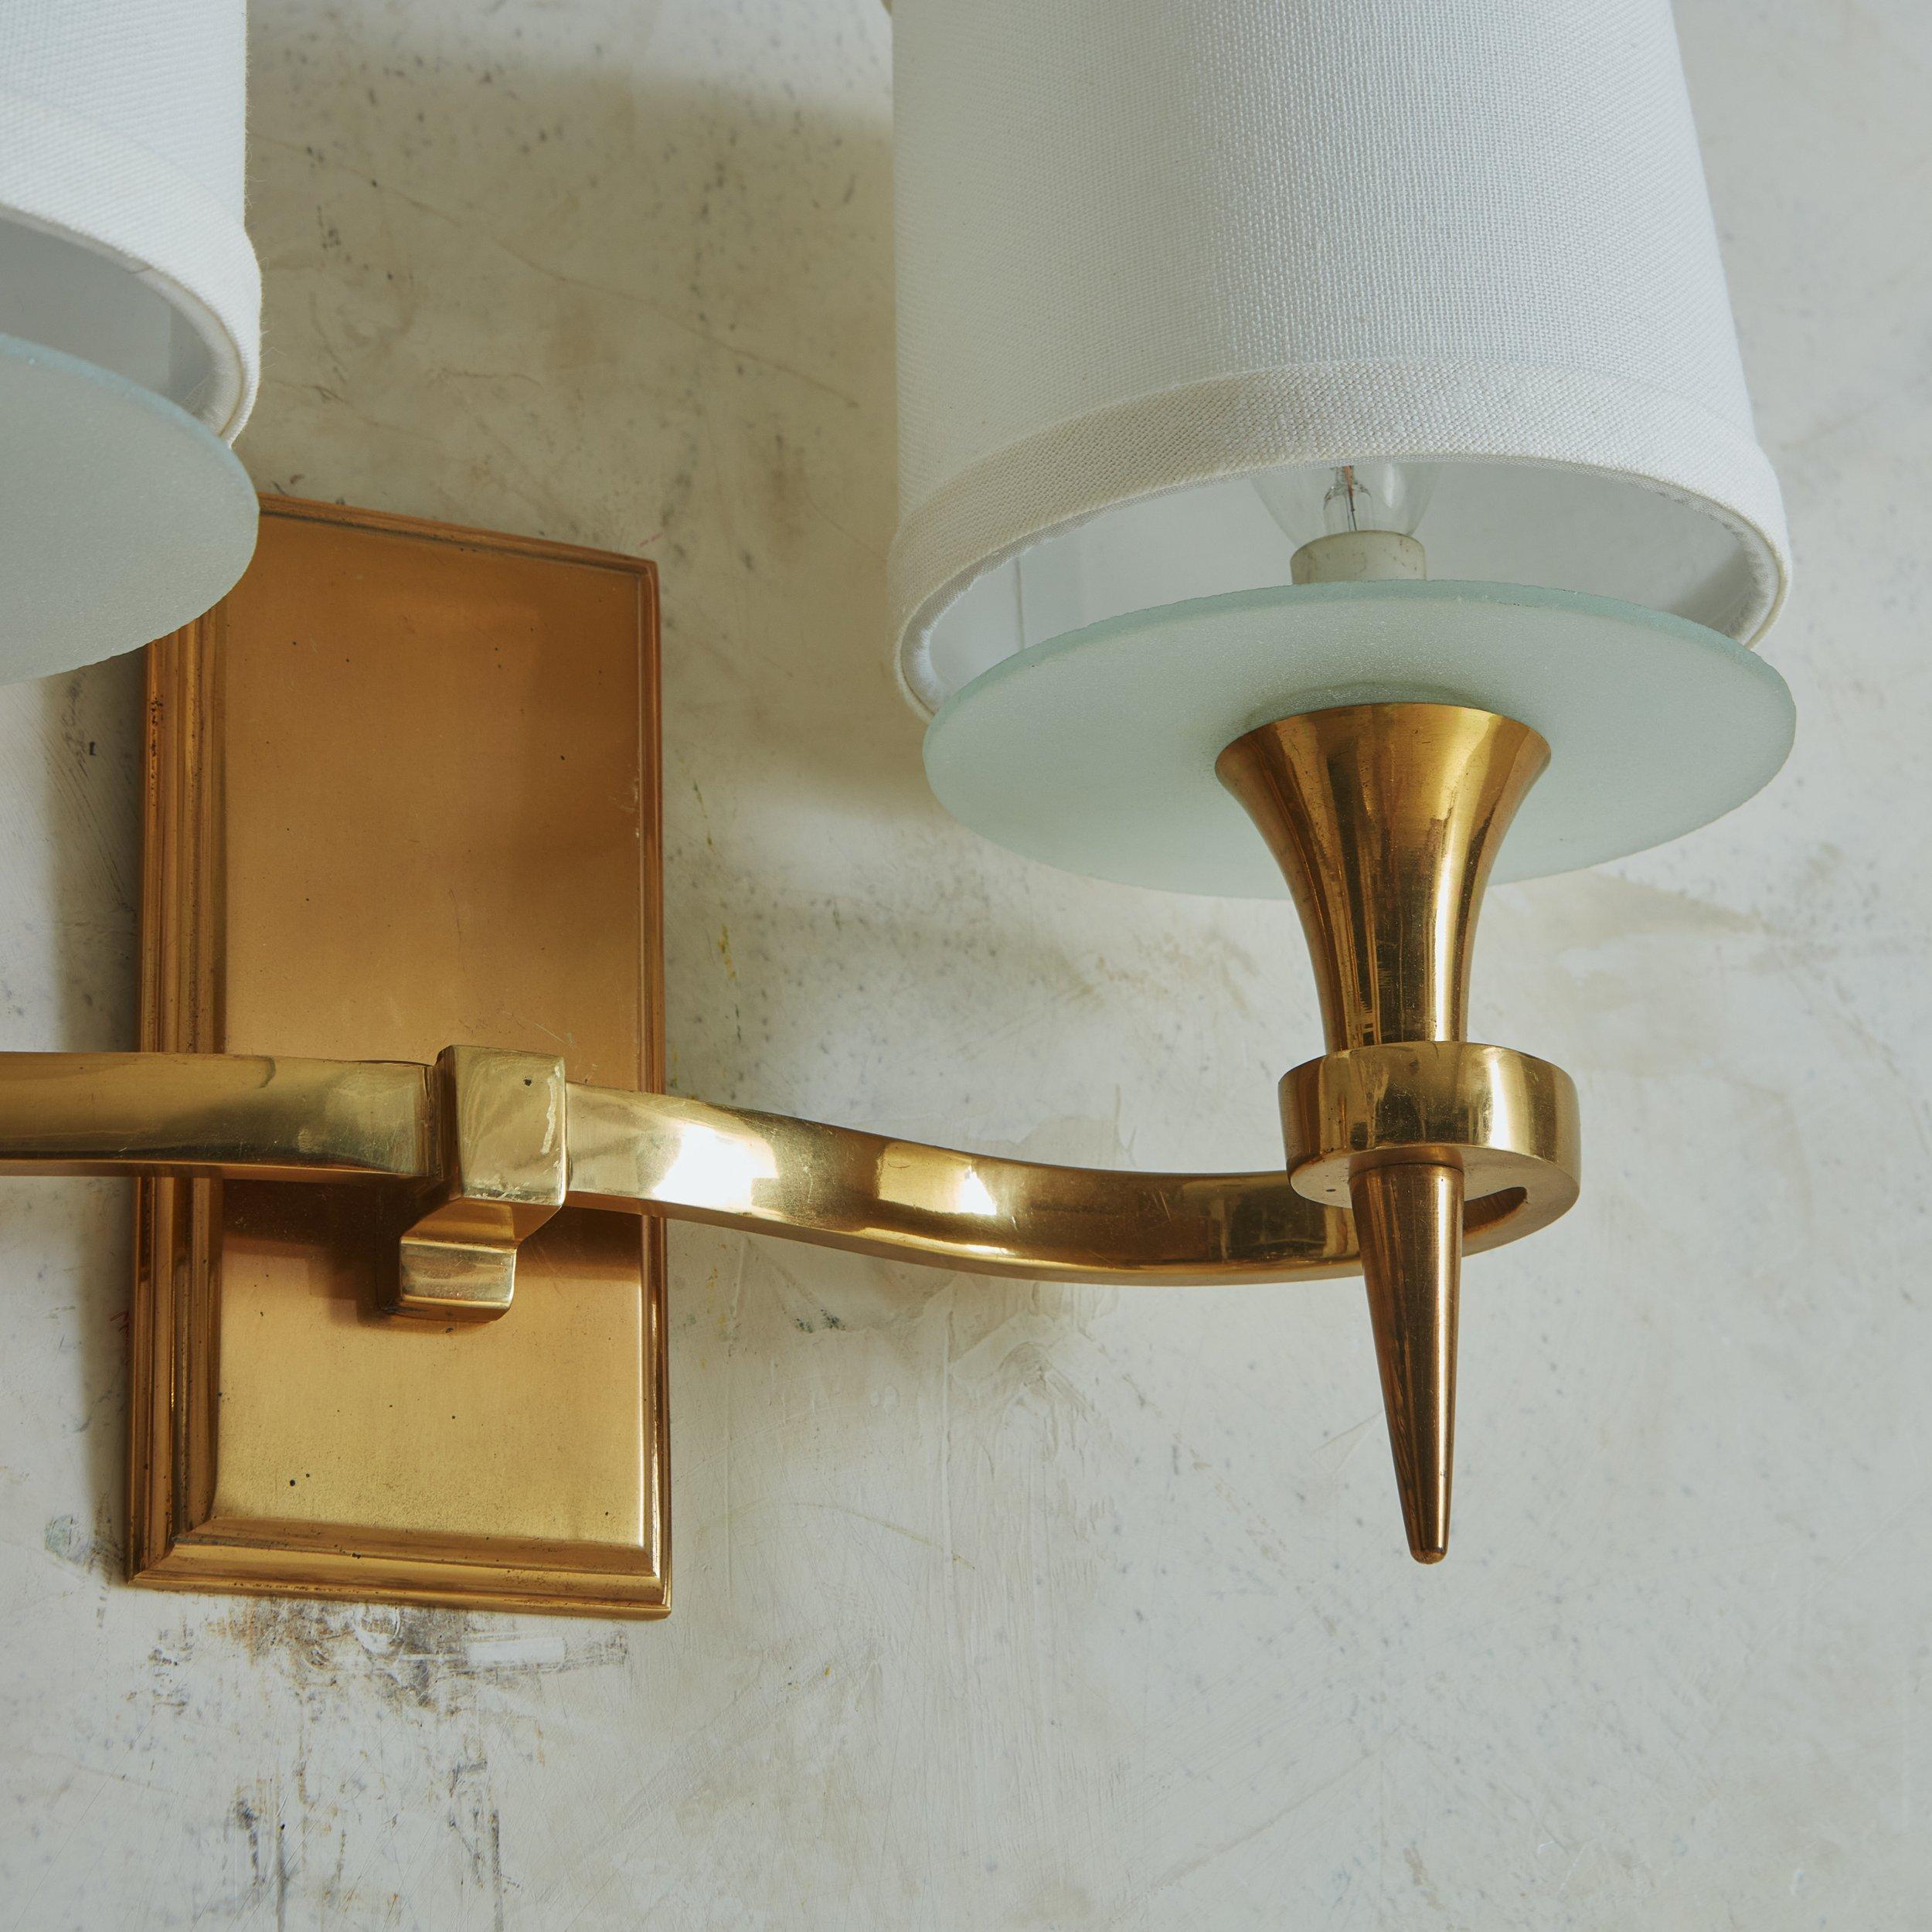 A pair of 1940s brass wall sconces featuring two beautifully curved arms with elegant cone shaped torches. They have rectangular backplates with a fine beveled edge, frosted glass bobeches and new white fabric shades. Unmarked. Sourced in France,